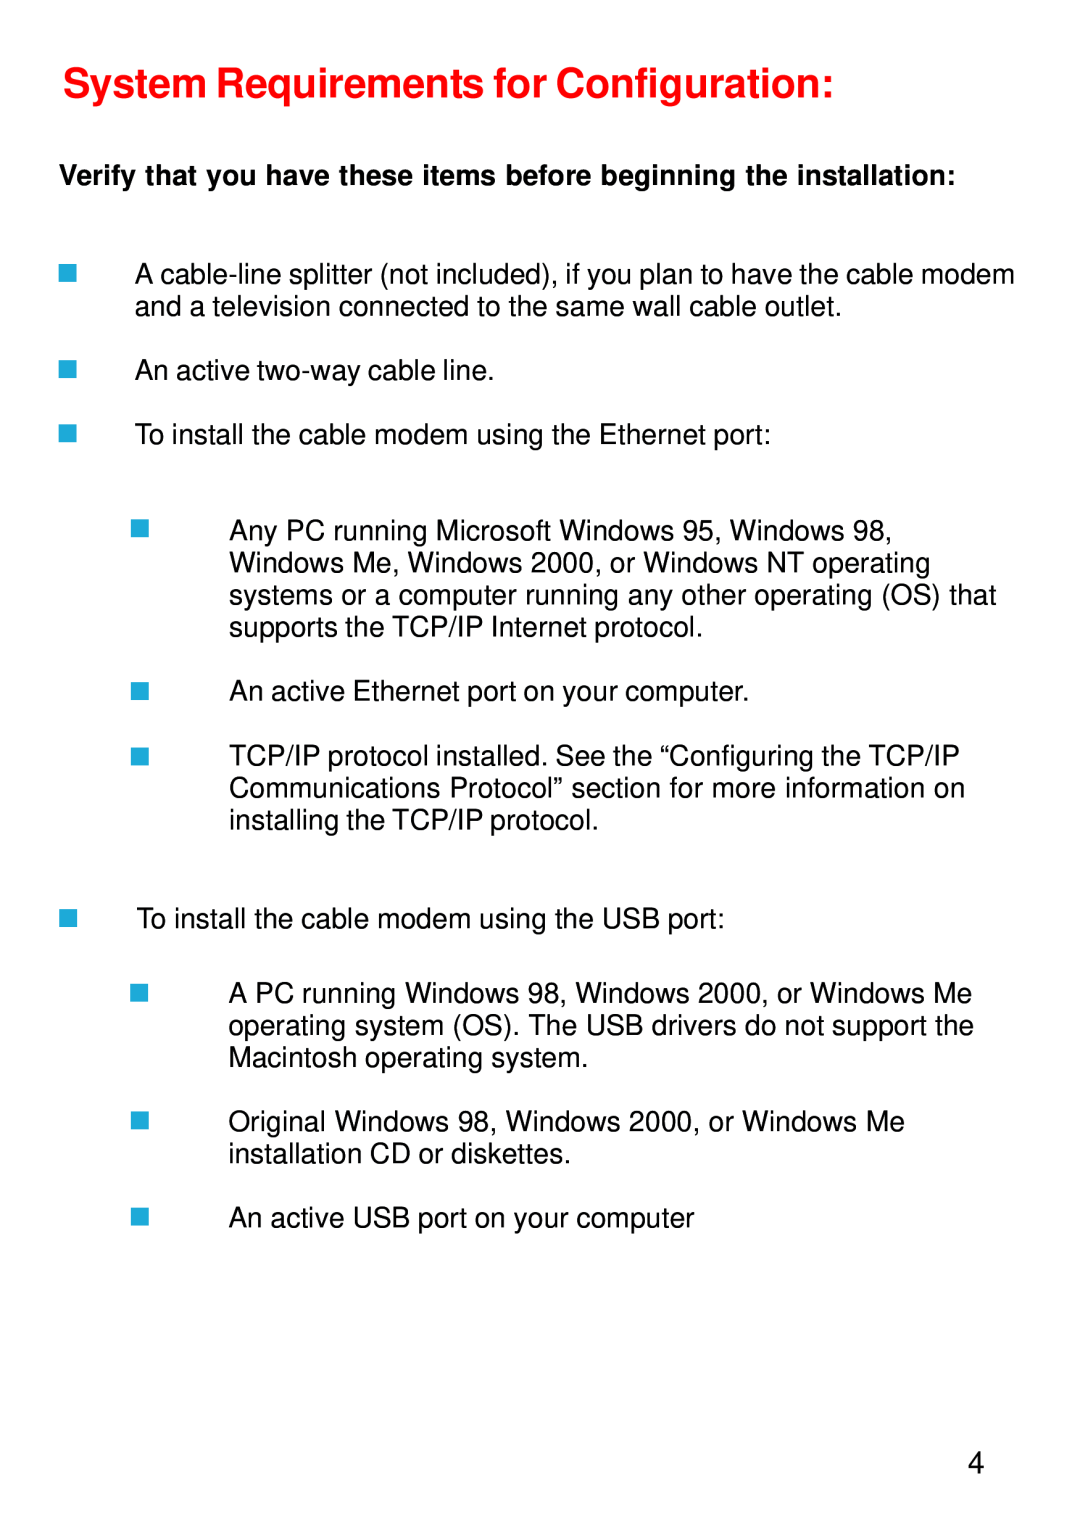 D-Link DCM-202 System Requirements for Configuration, Verify that you have these items before beginning the installation 